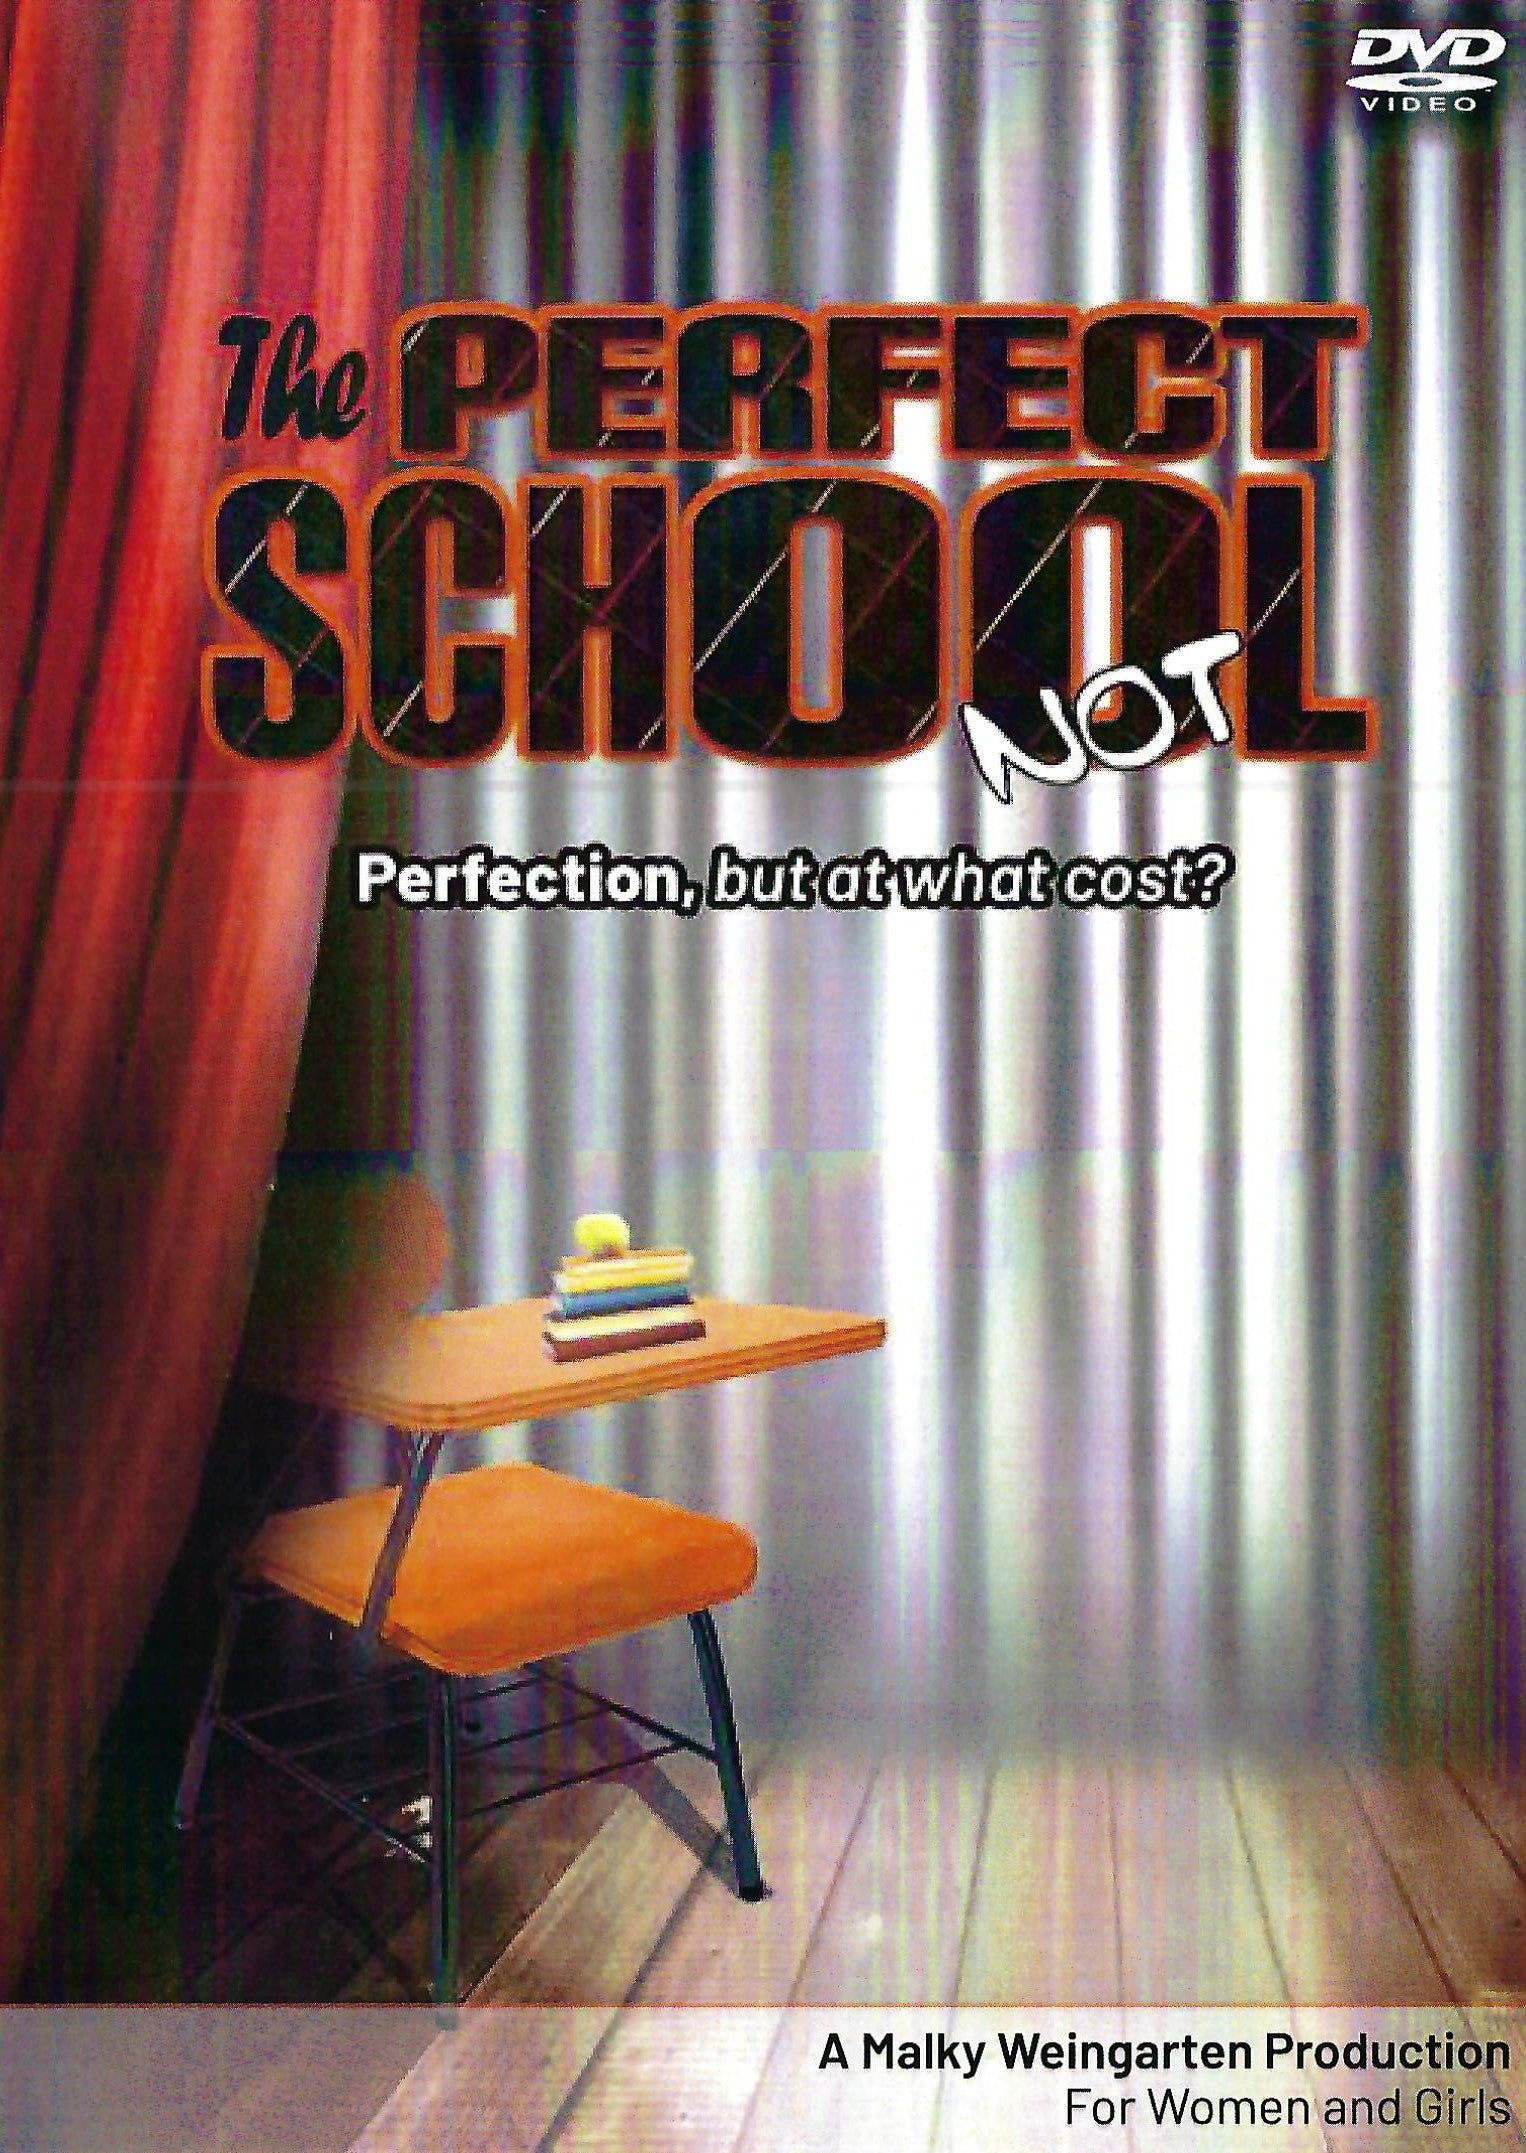 The Perfect School (Video)